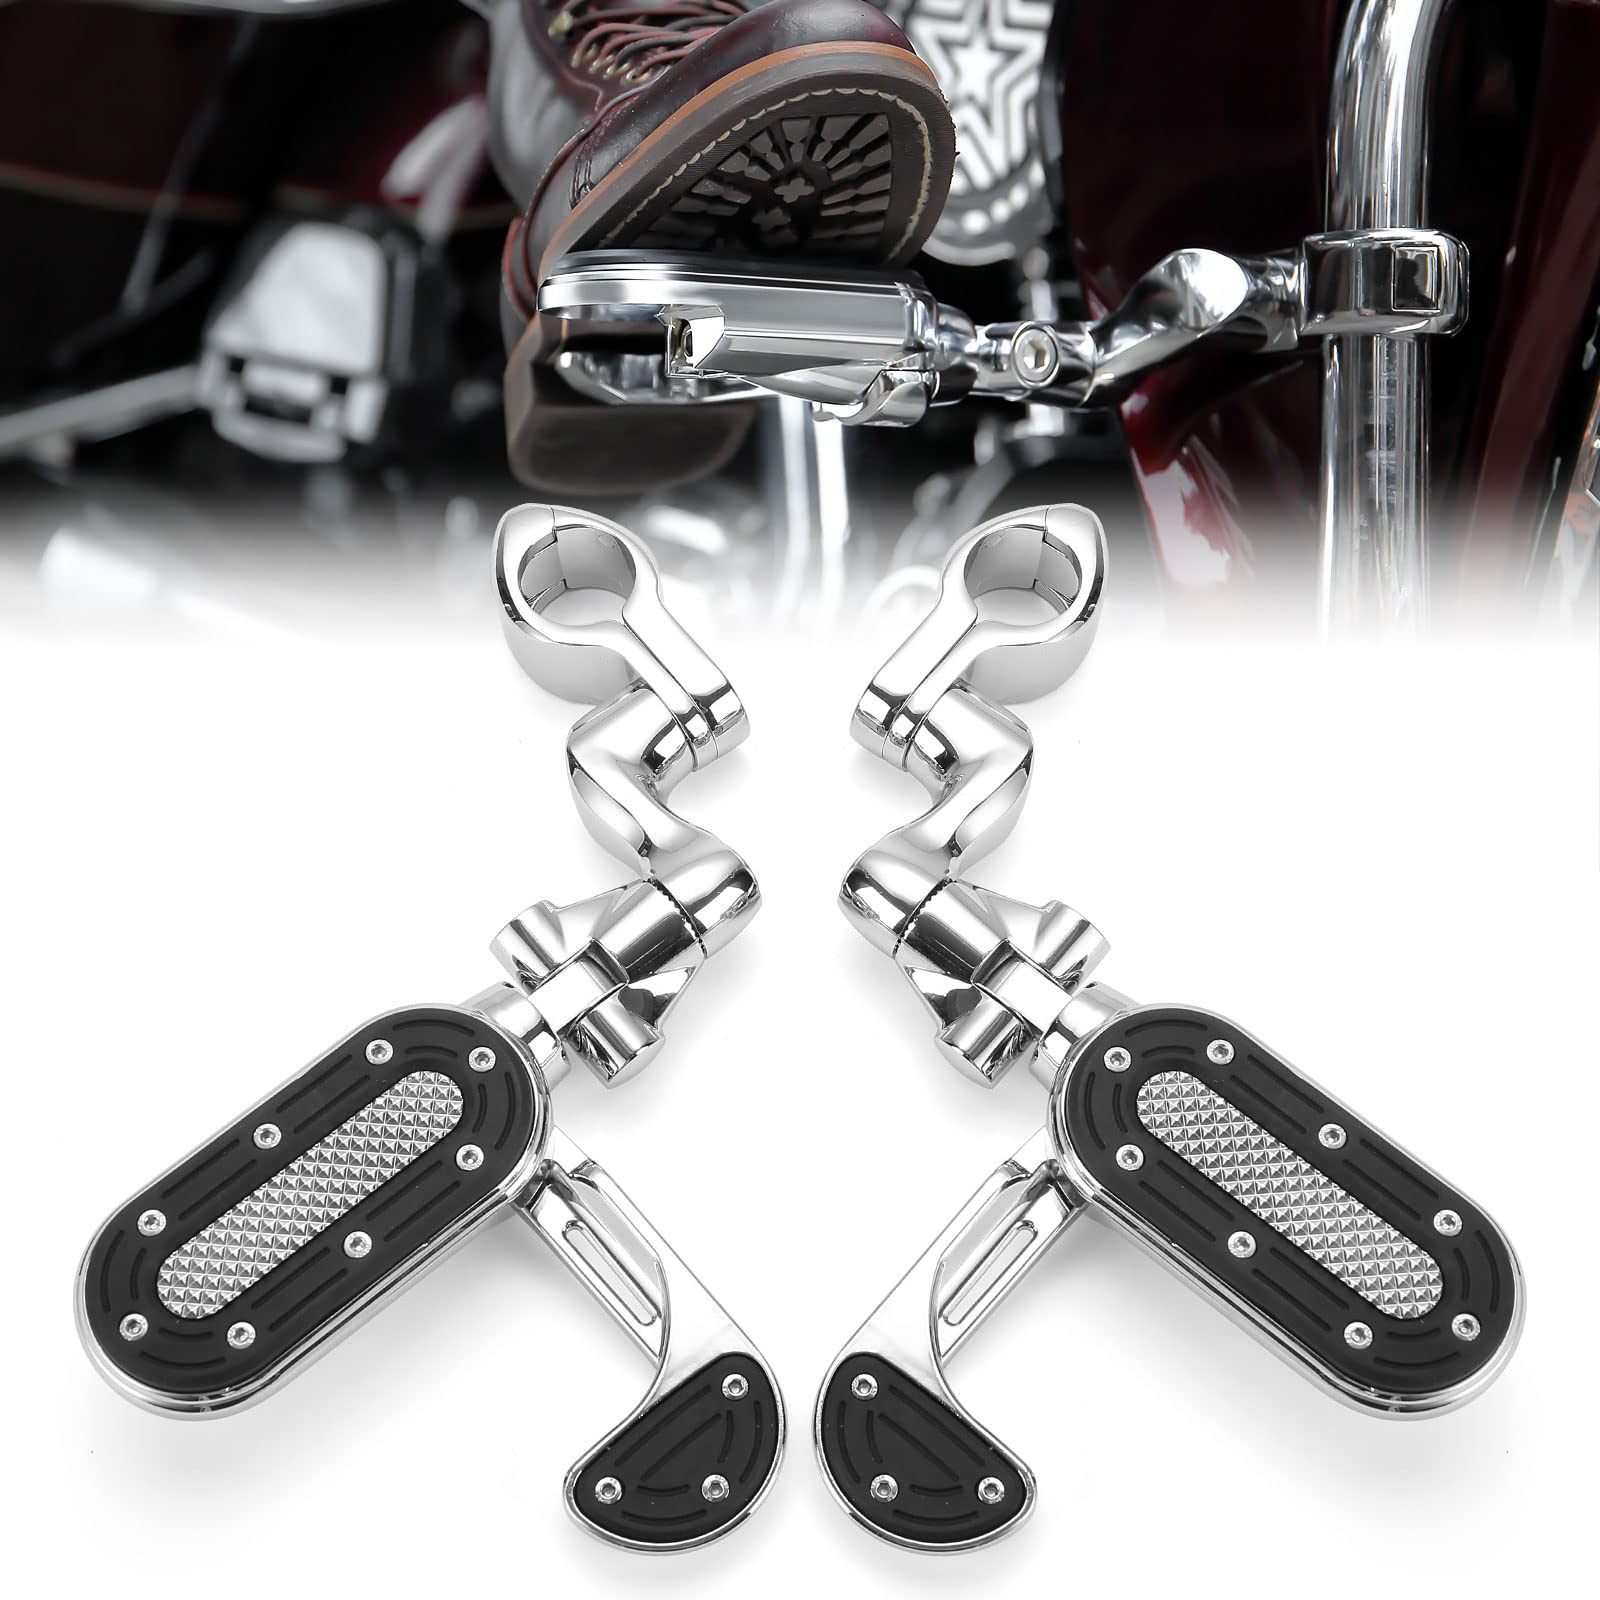 Motorcycle Adjustable Foot Pegs for 1.25